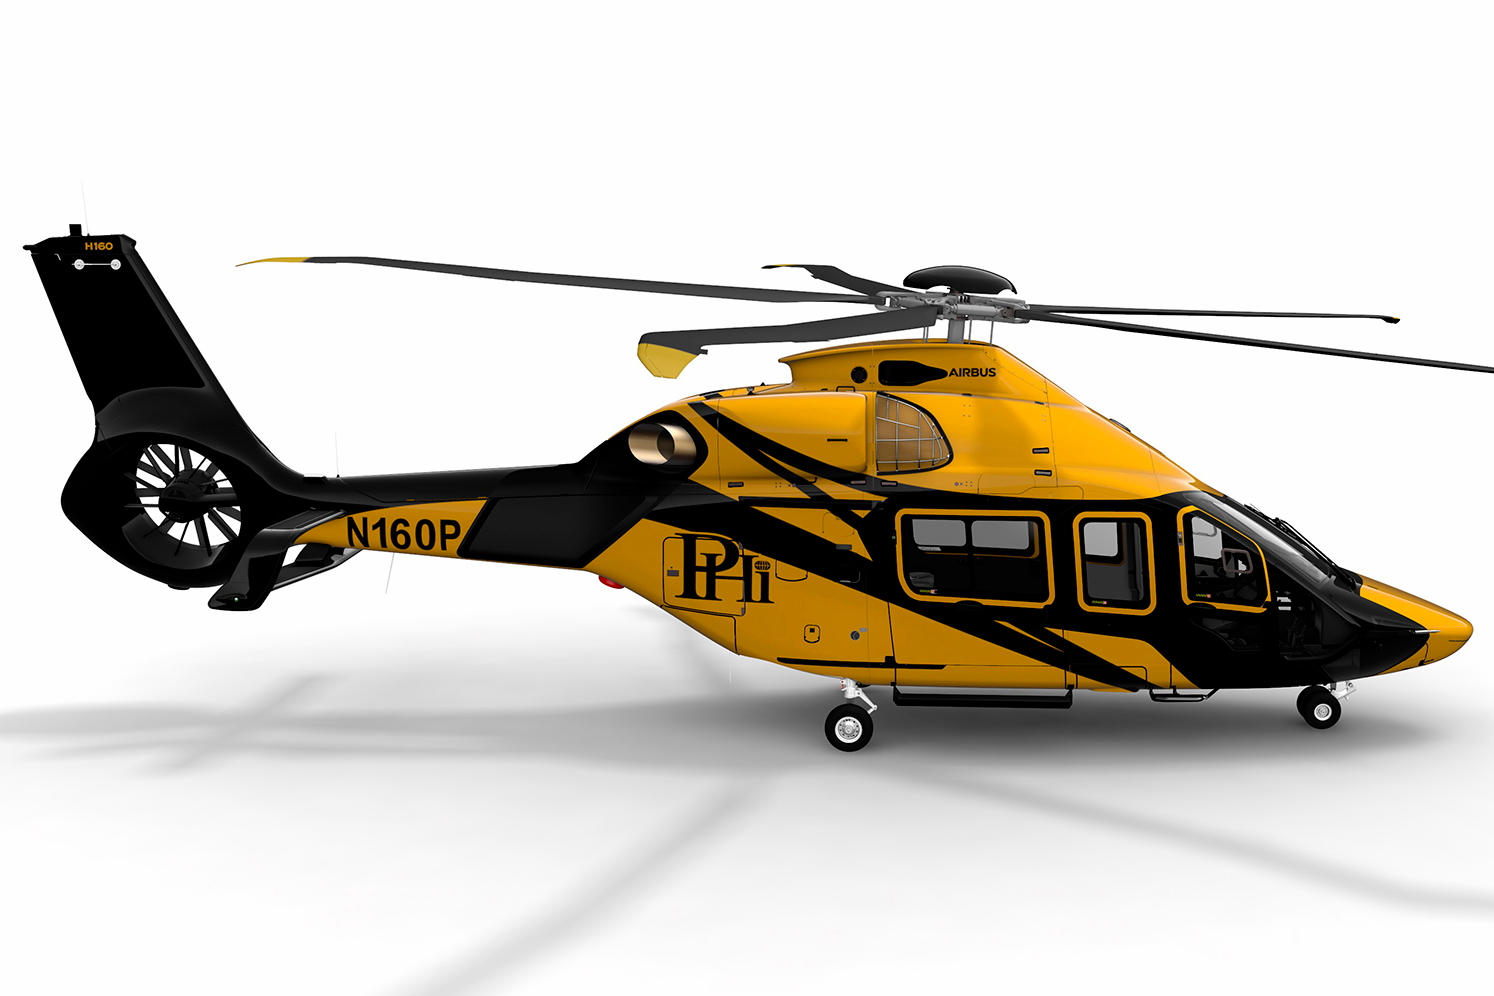 Shell has selected PHI, an US-based offshore helicopter company, to operate four Airbus H160s to service a support contract in the Gulf of Mexico. The contract marks the entry into the oil and gas market of the H160. Click to enlarge.